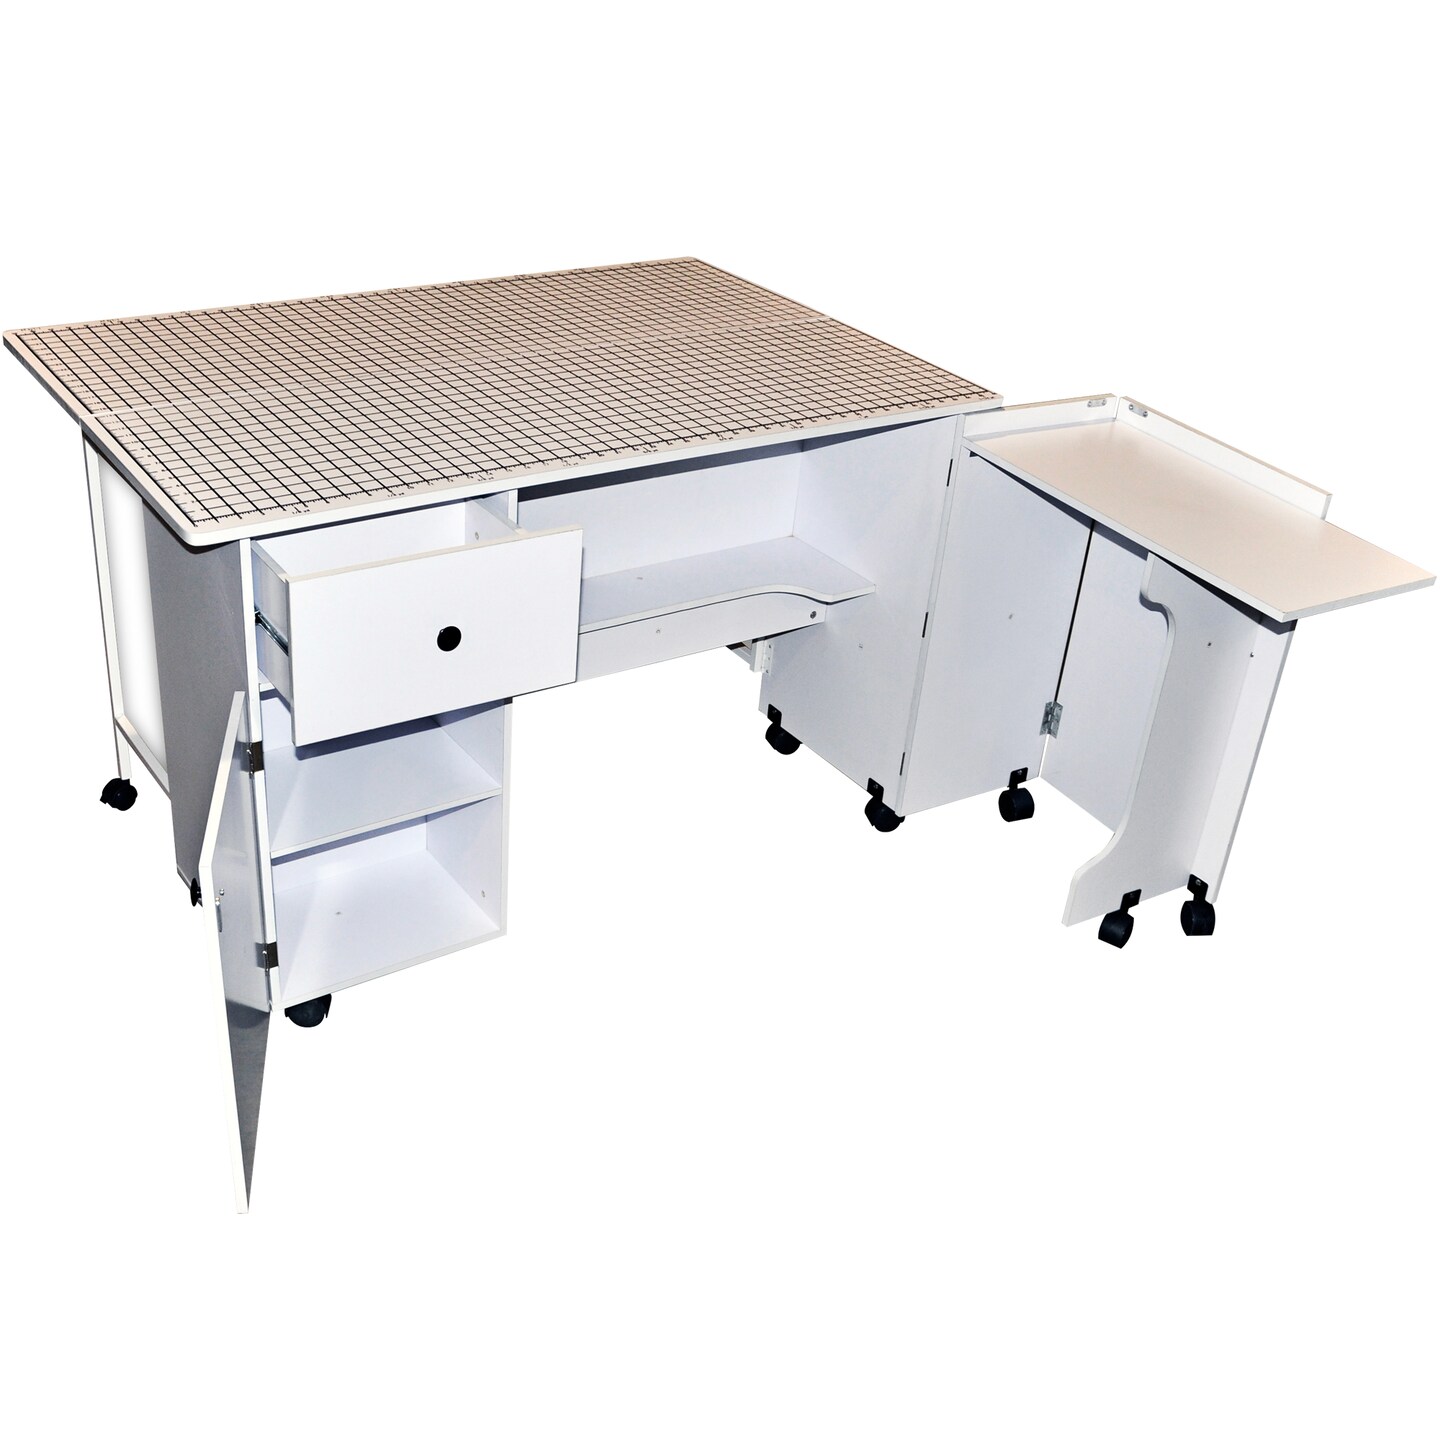 Sullivans Deluxe Cutting Table